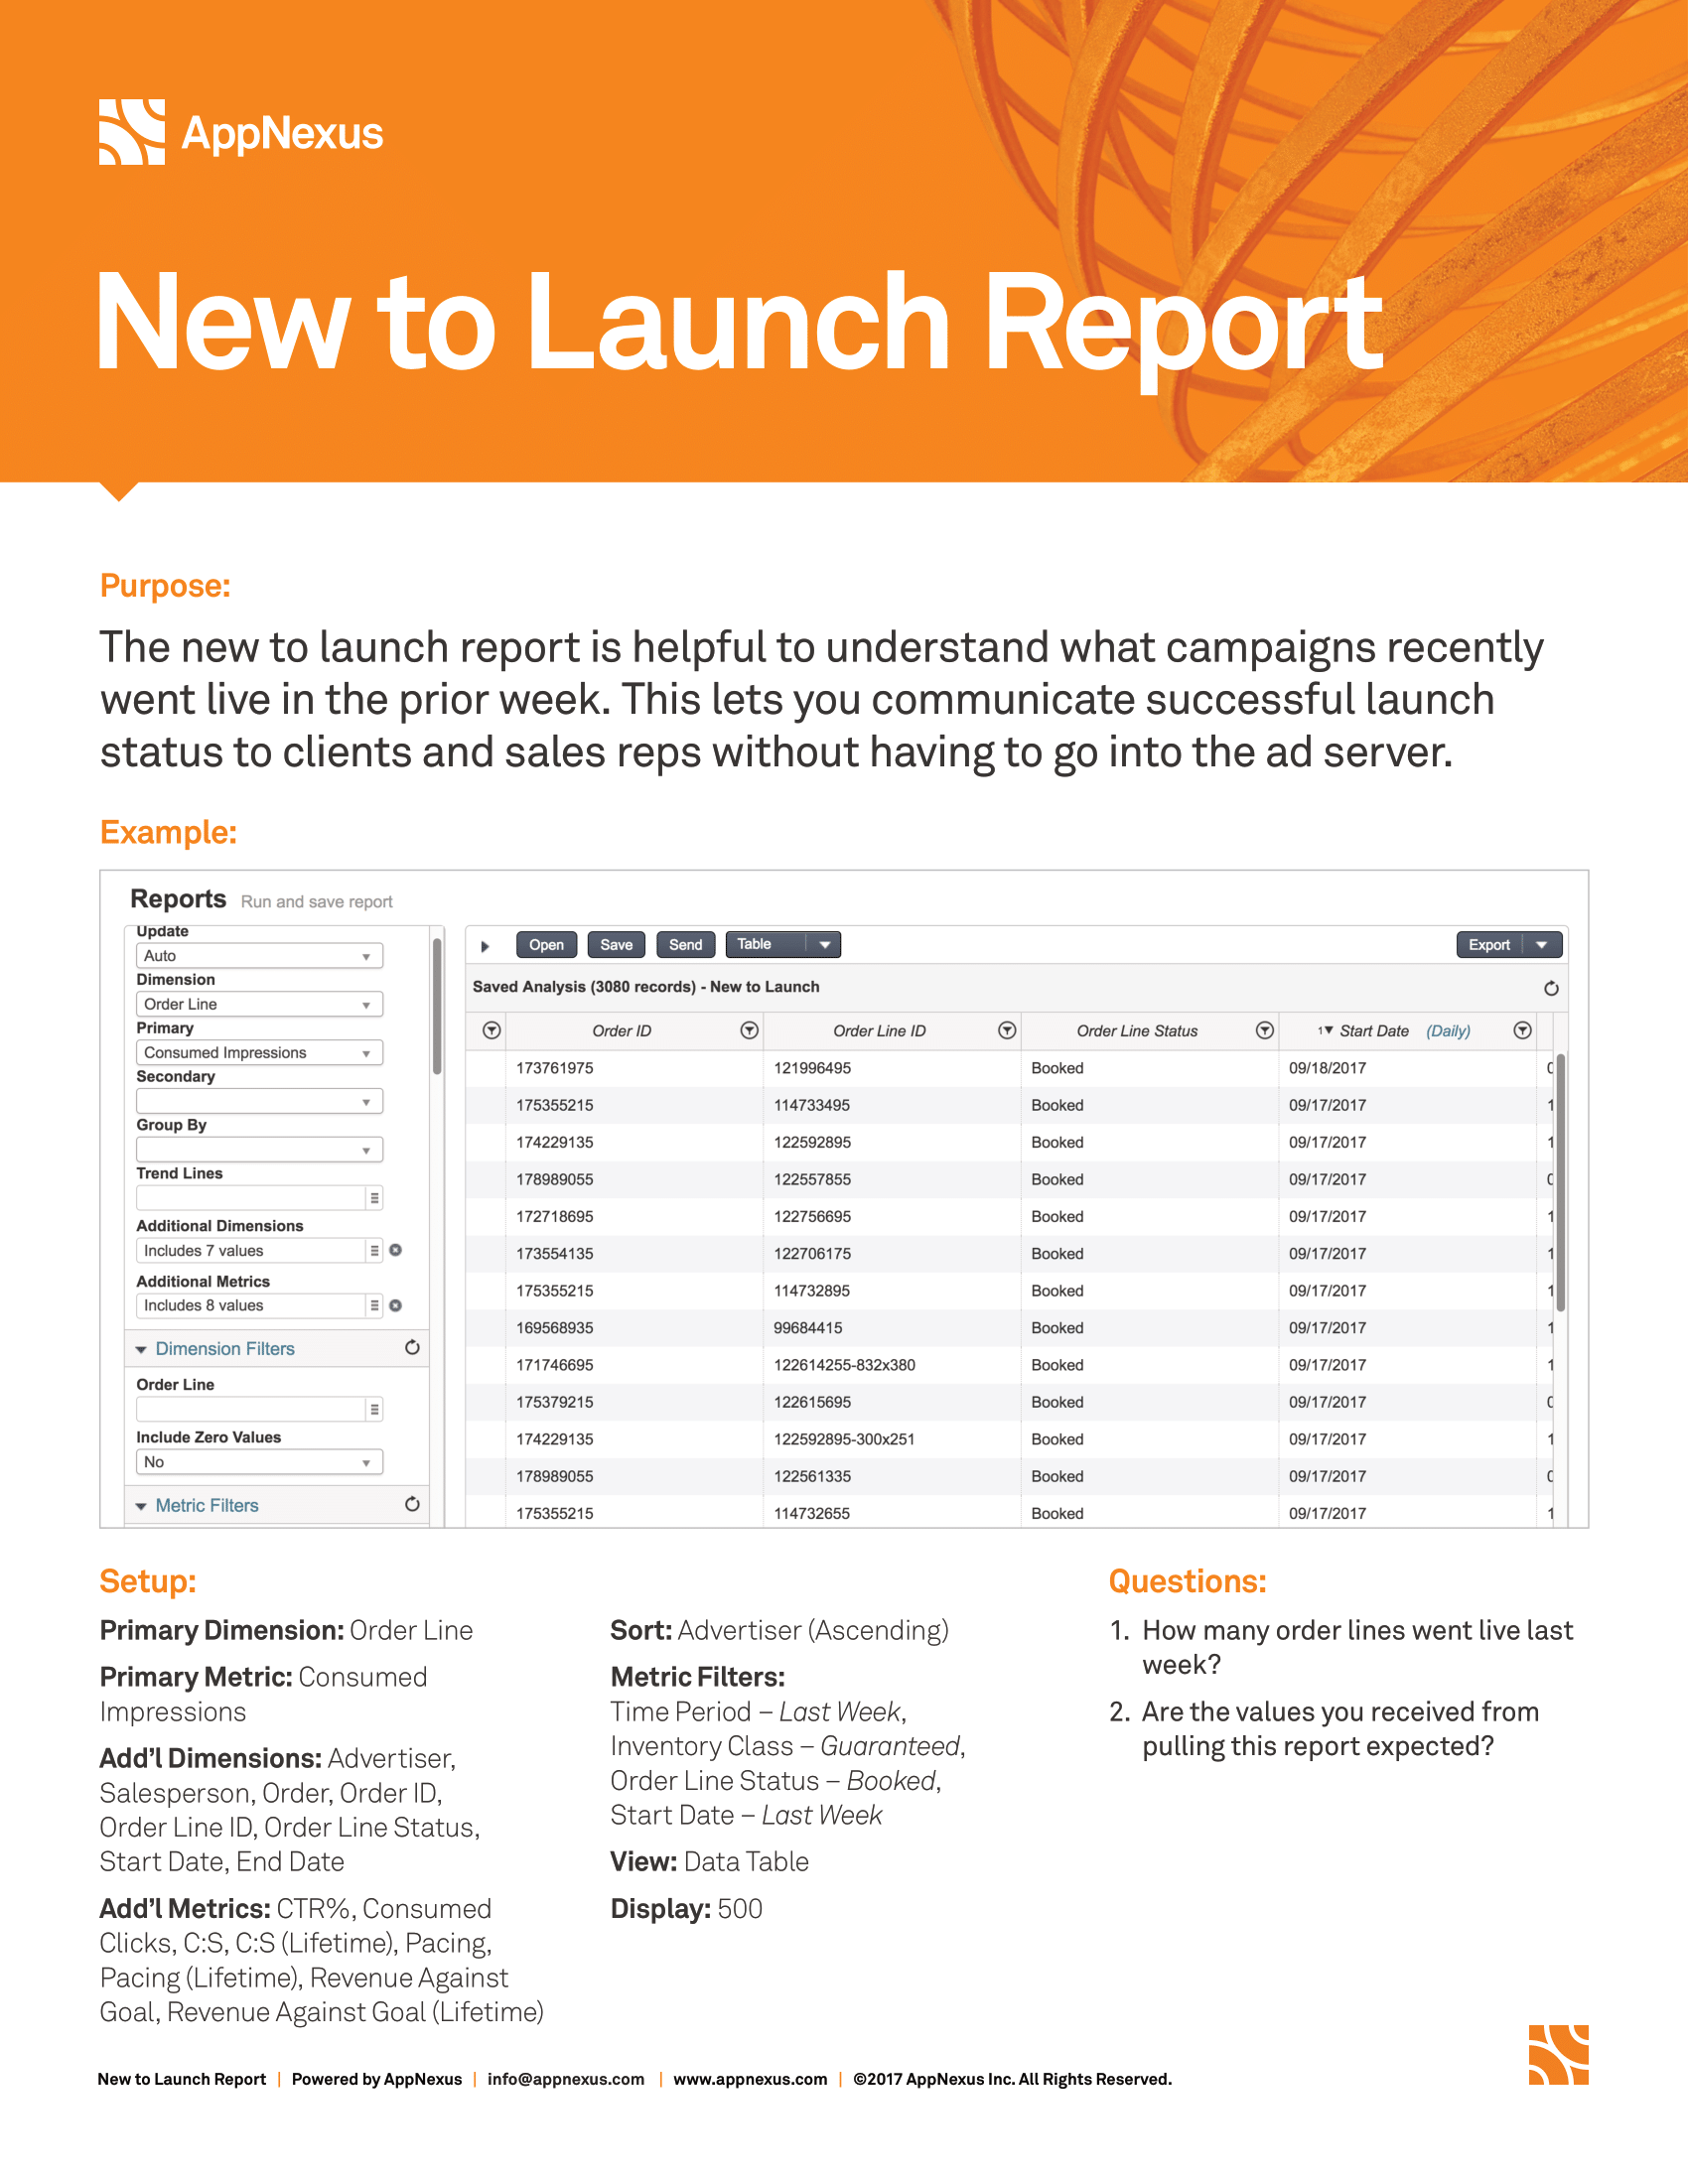 Screenshot that provides details about the New to Launch report.